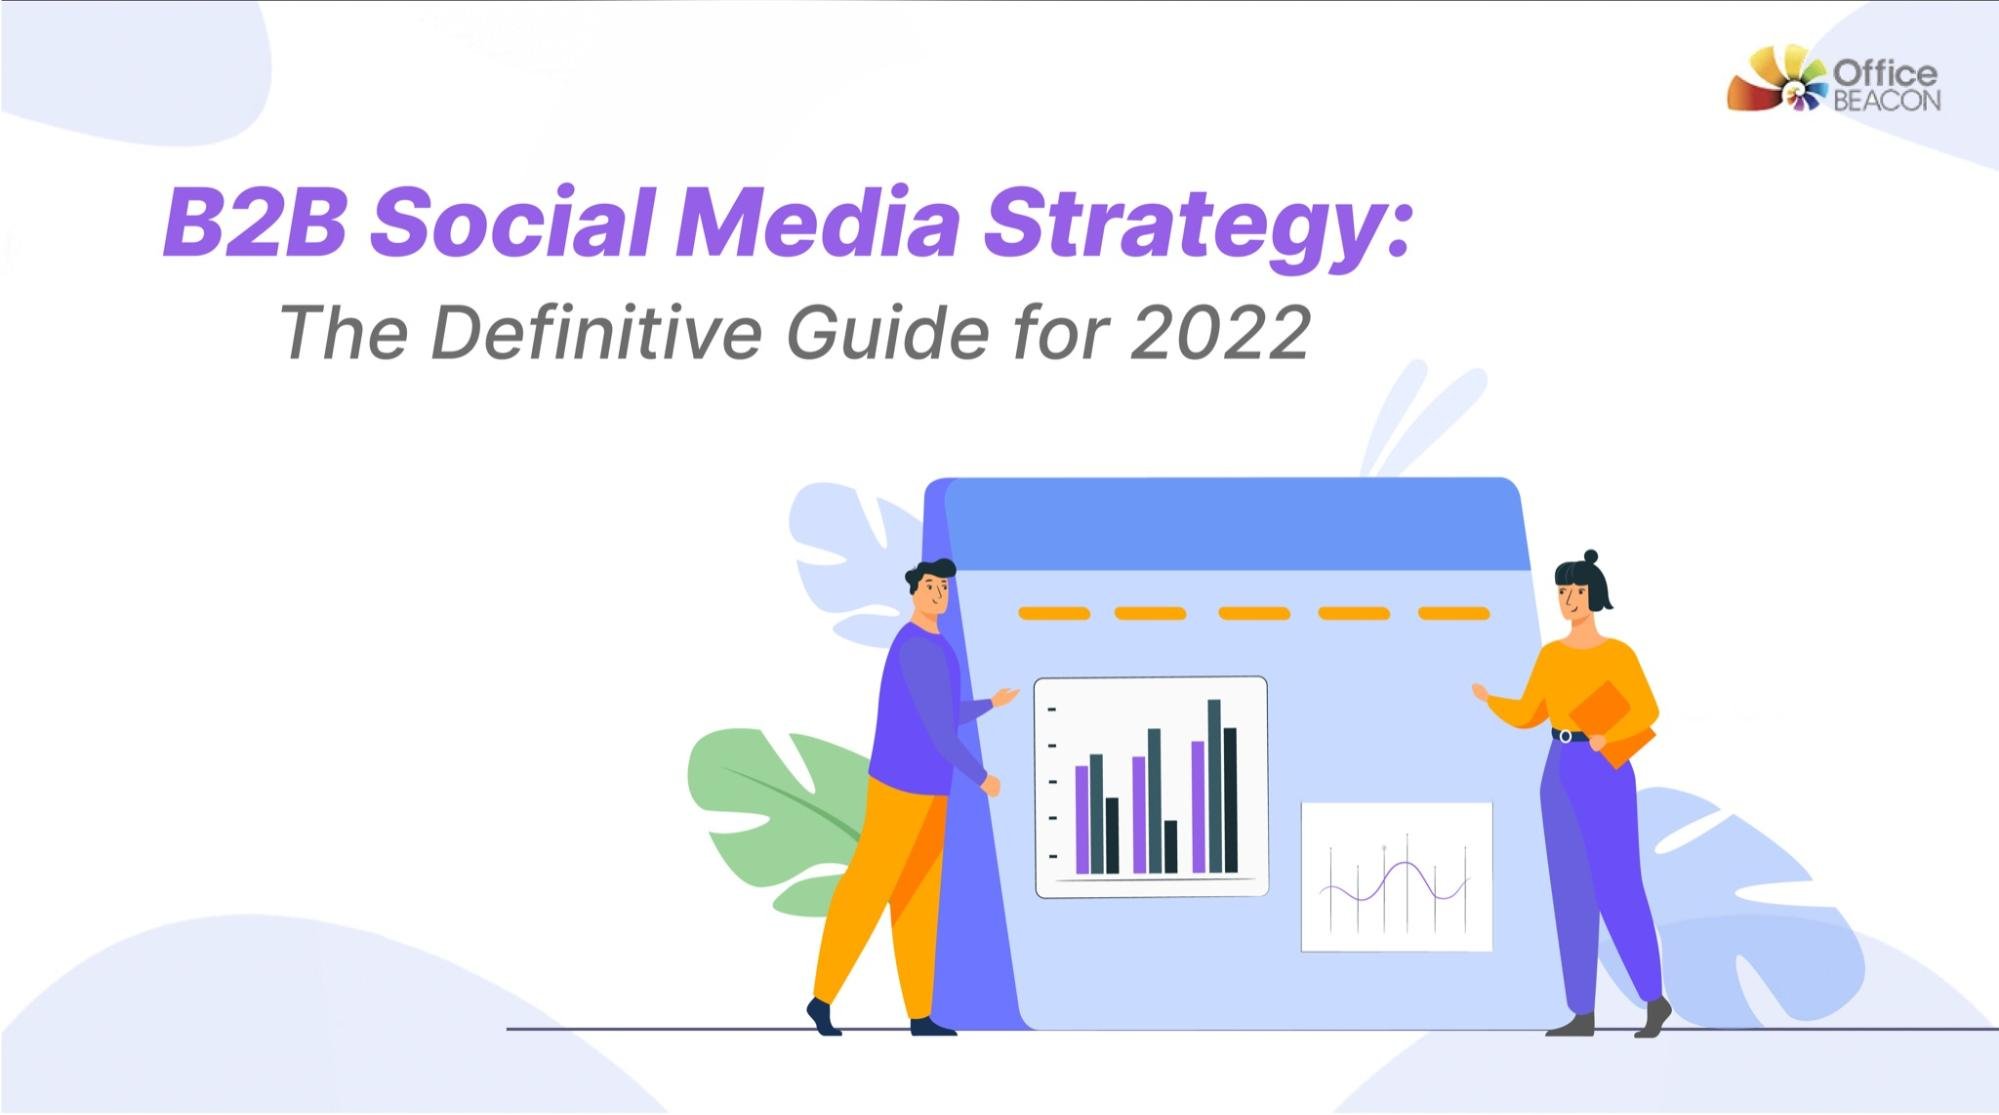 B2B Social Media Strategy: The Definitive Guide for 2022